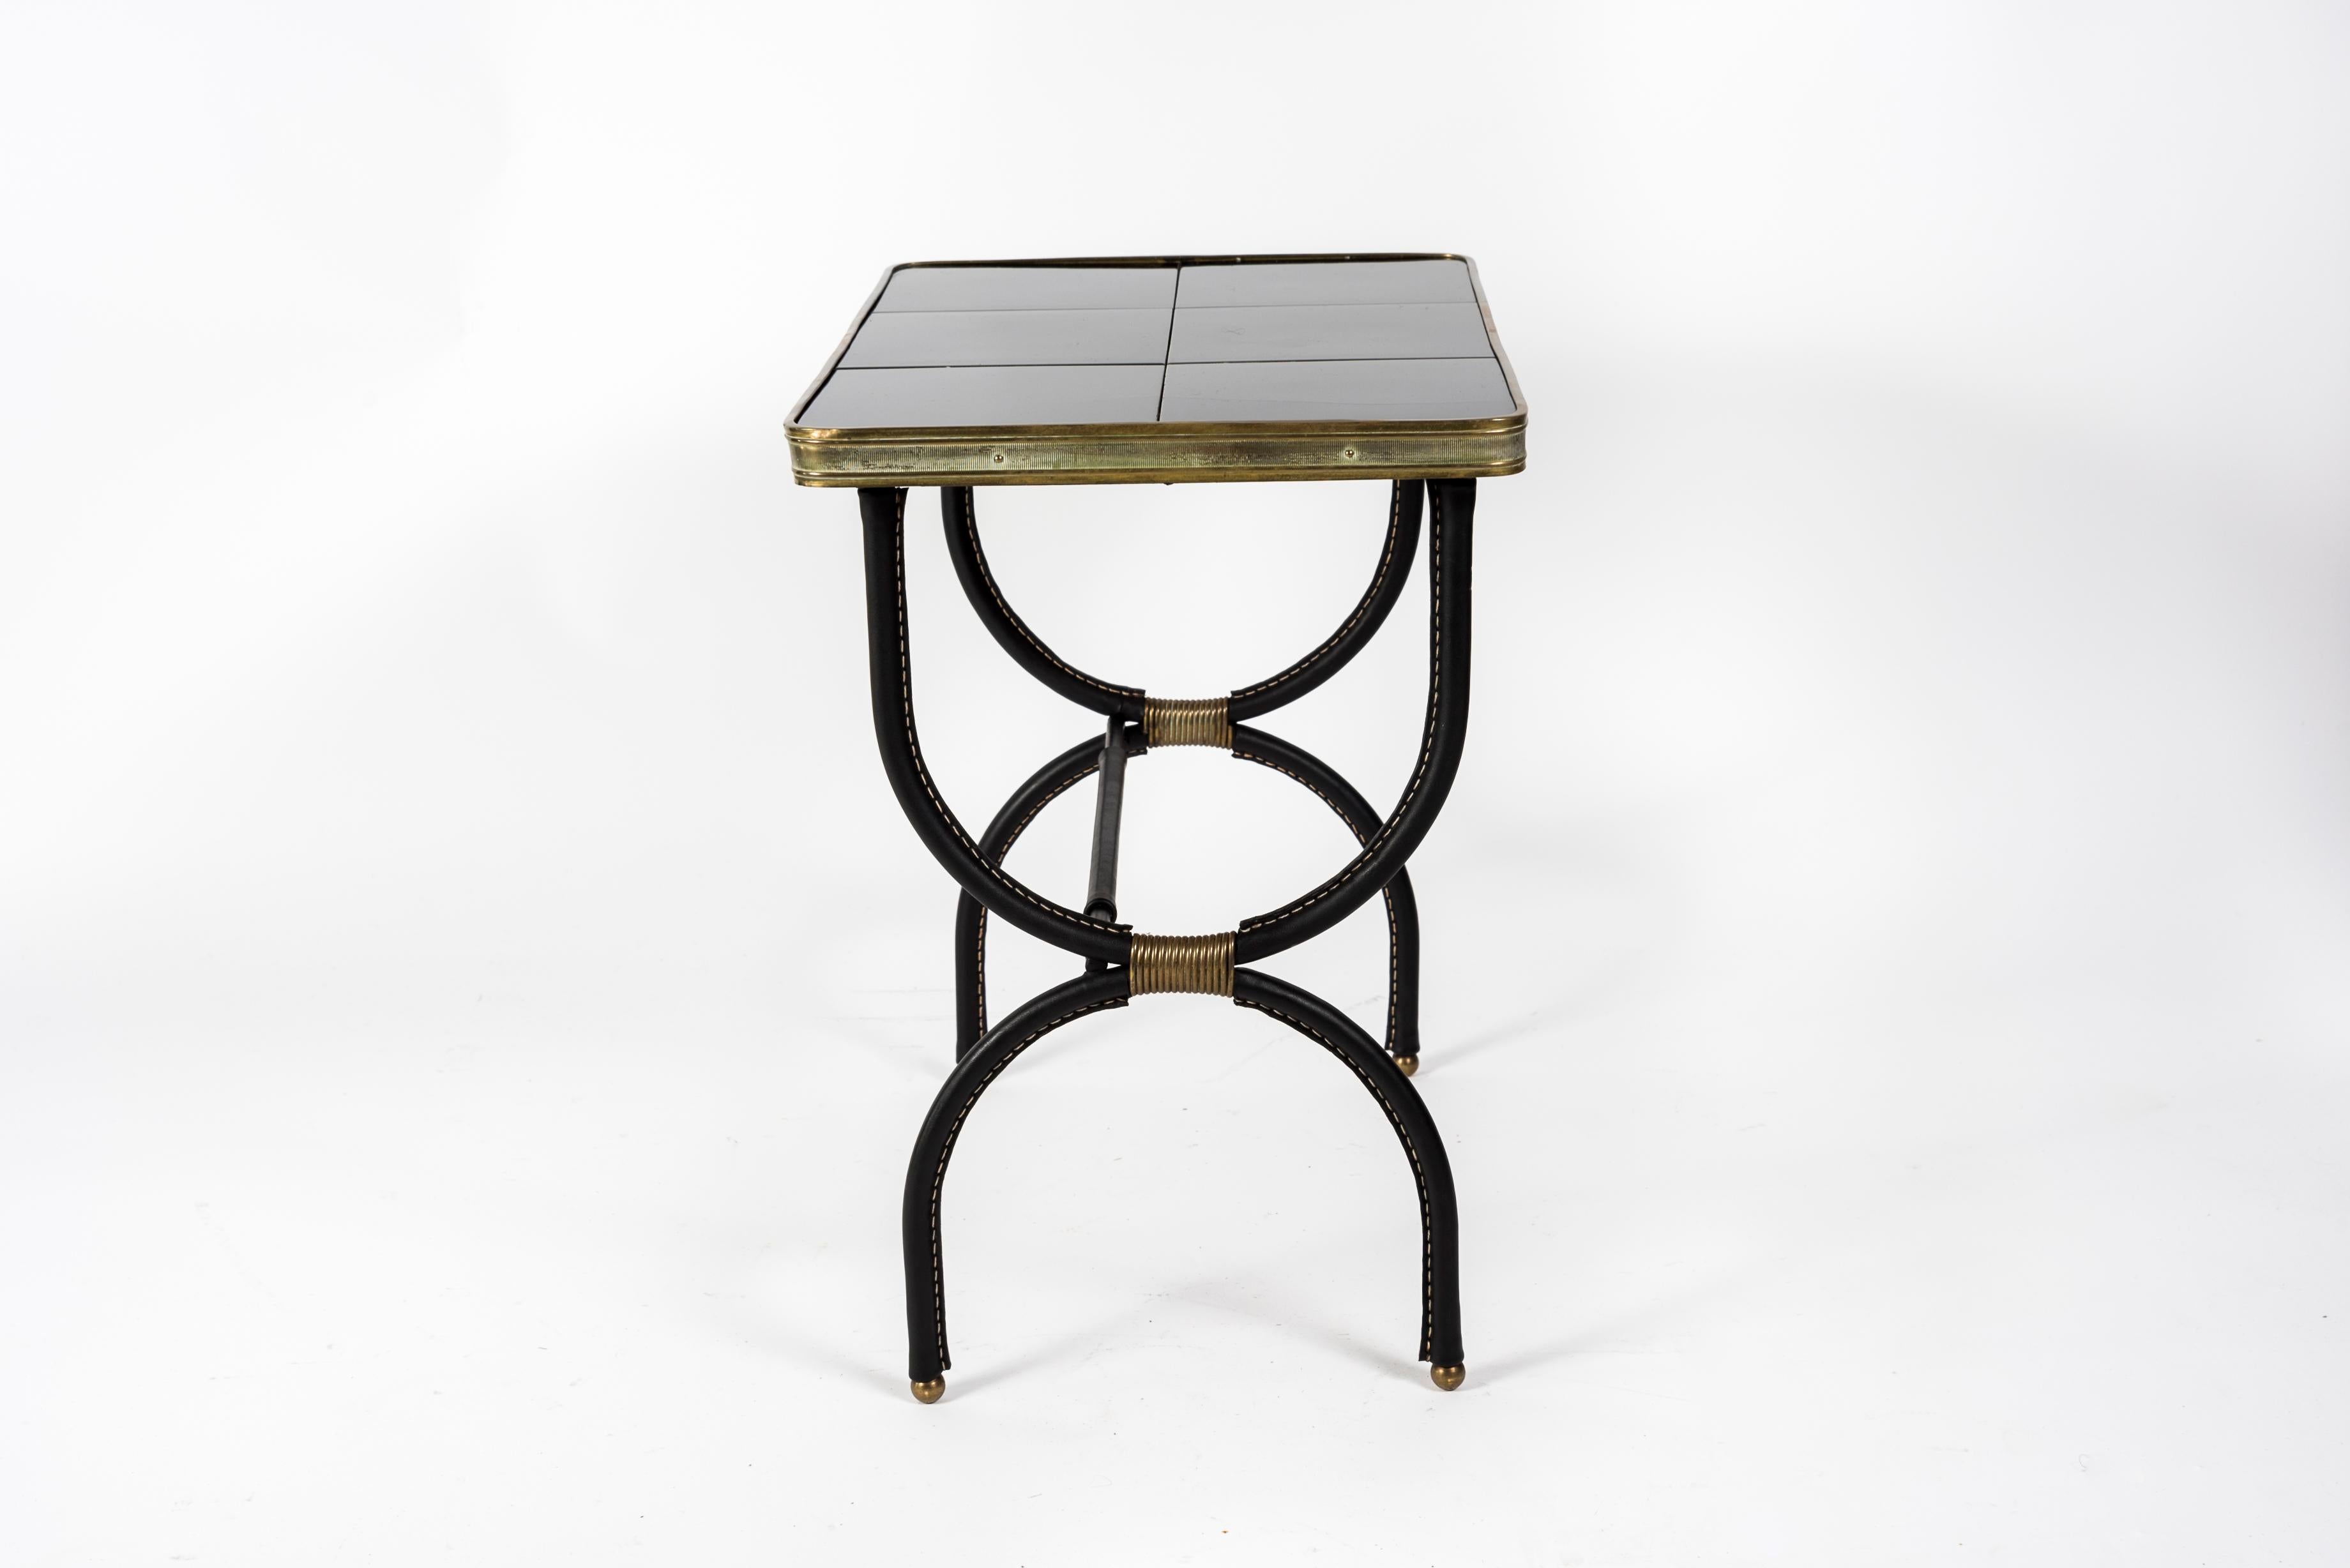 Metal Pair of 1950's Stitched Leather Side Table by Jacques Adnet For Sale